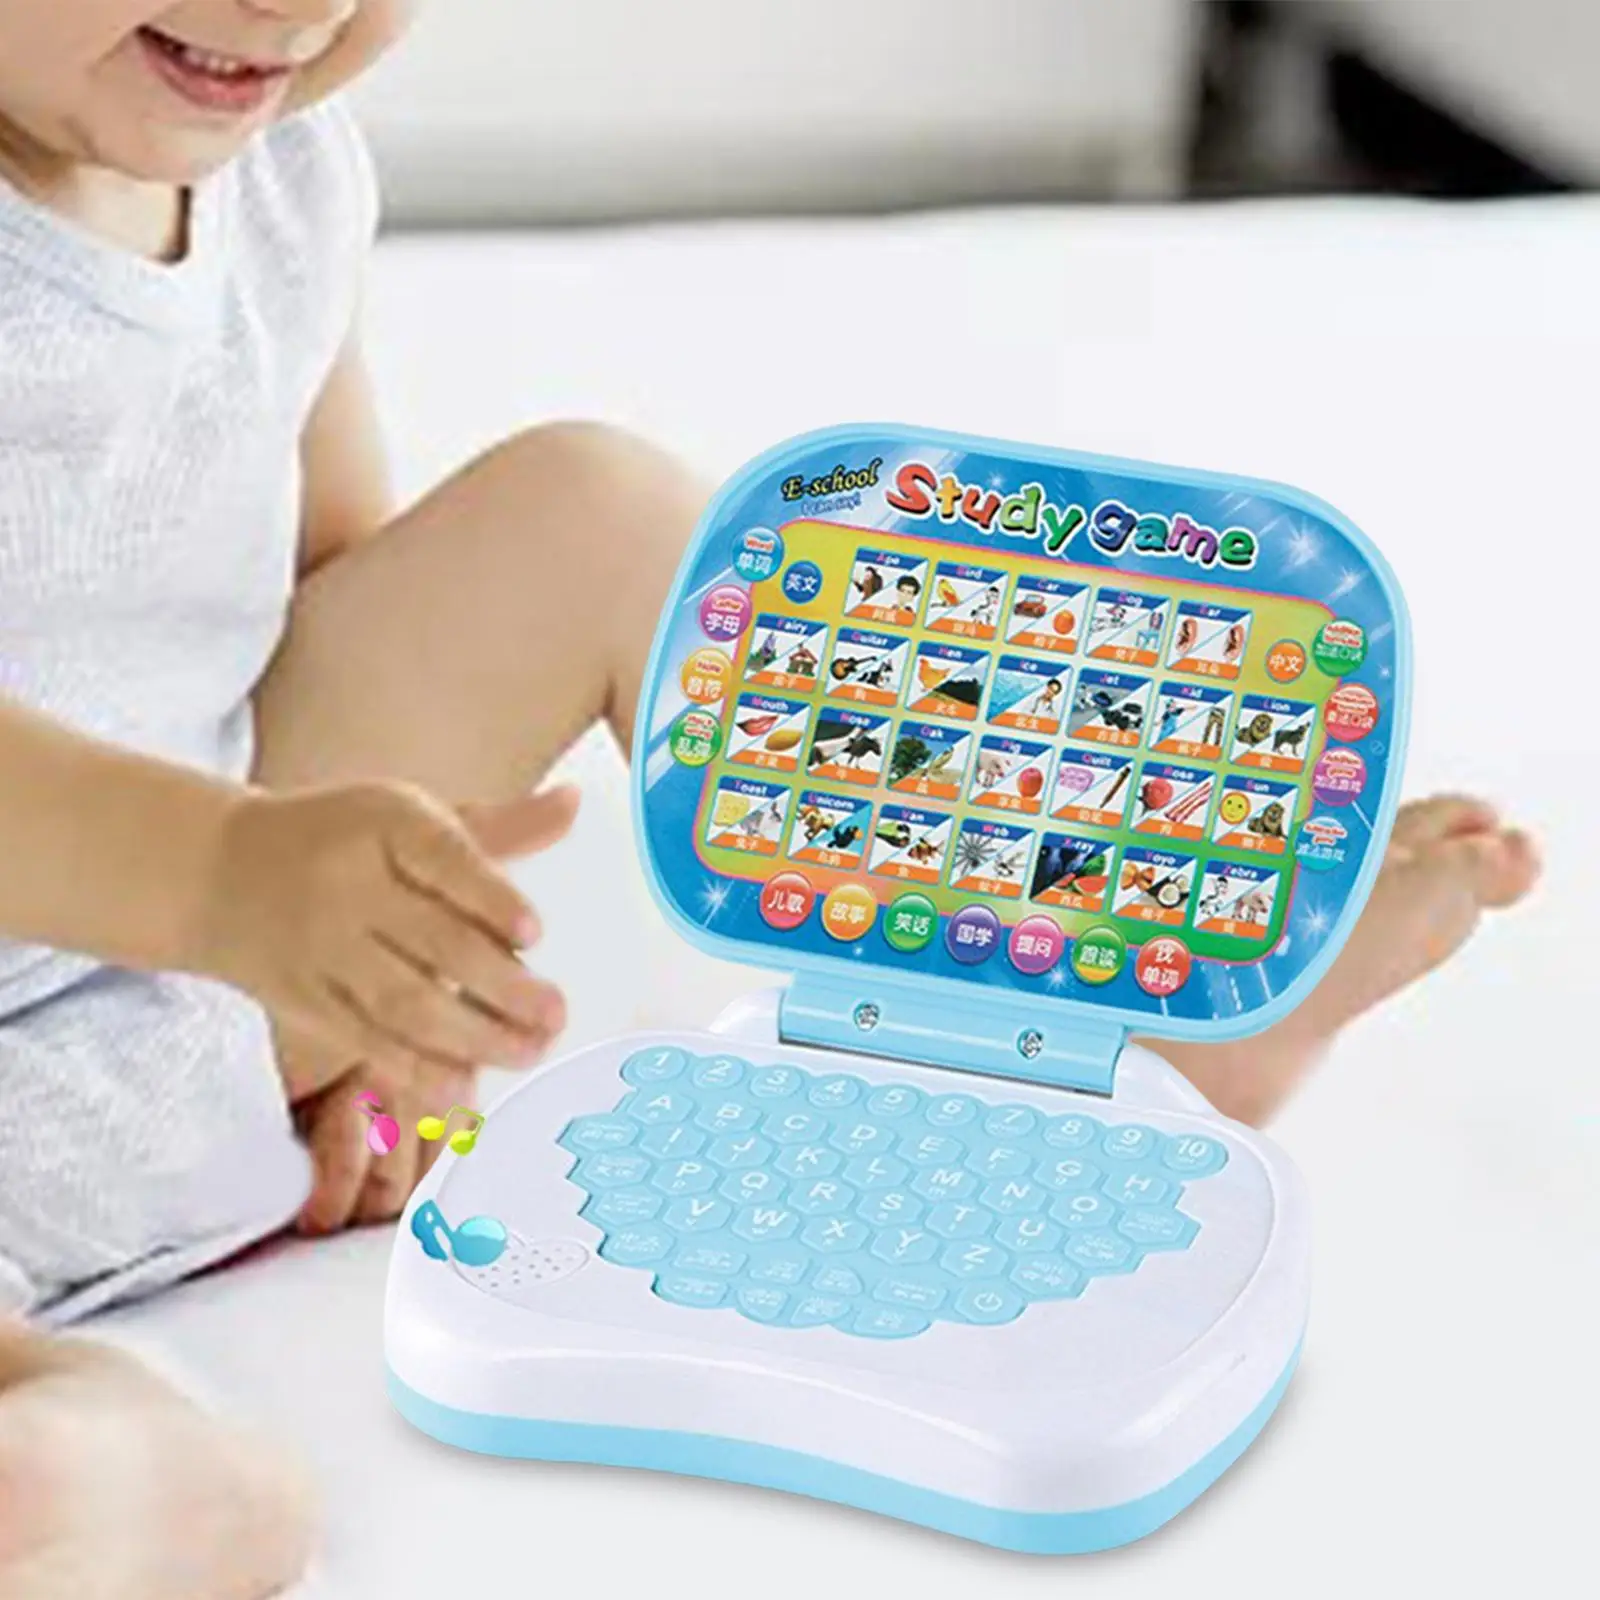 Multifunction Handheld Language Learning Machine Computer Child Interactive Learning Pad Tablet for Children Bithday Gifts